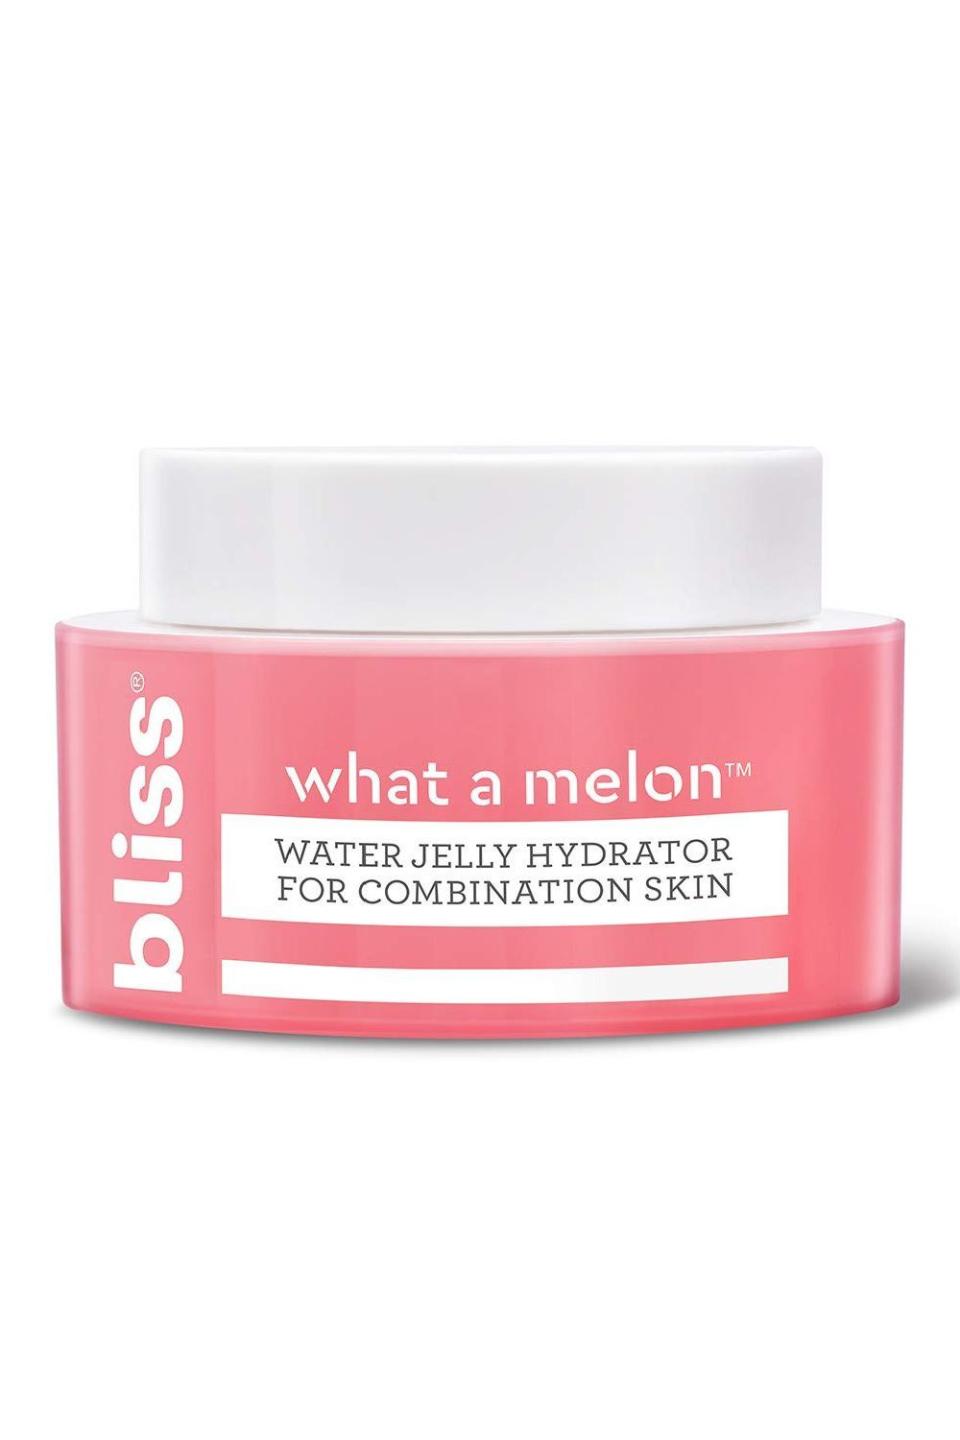 4) Bliss What a Melon Jelly Hydrator for Combination Skin